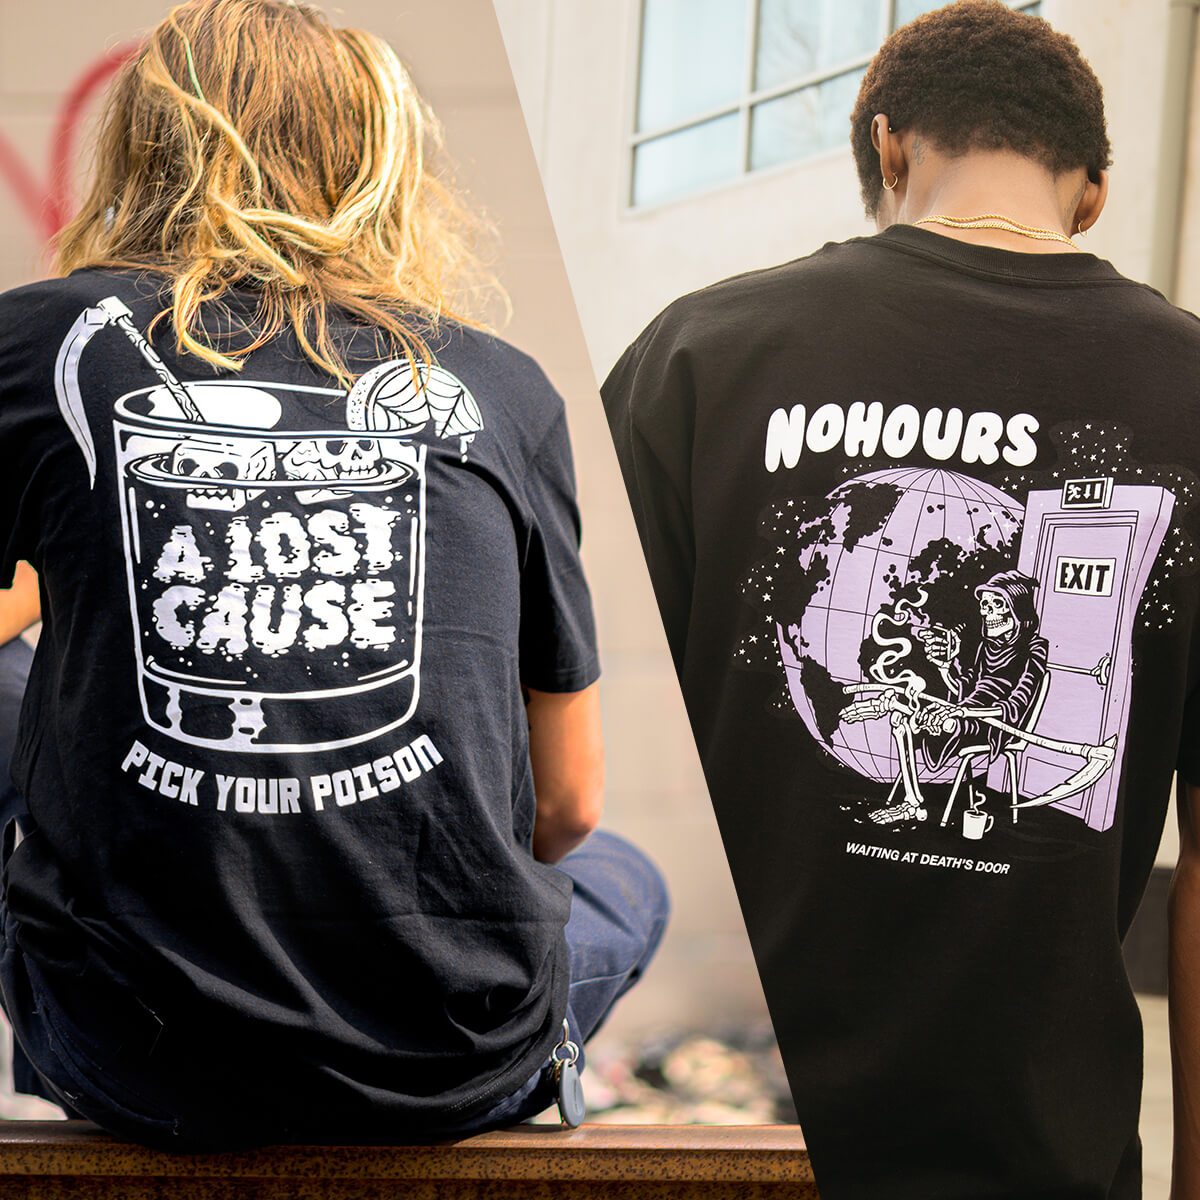 NEW TEES FROM LOST CAUSE AND MORE - SHOP ALL TEES